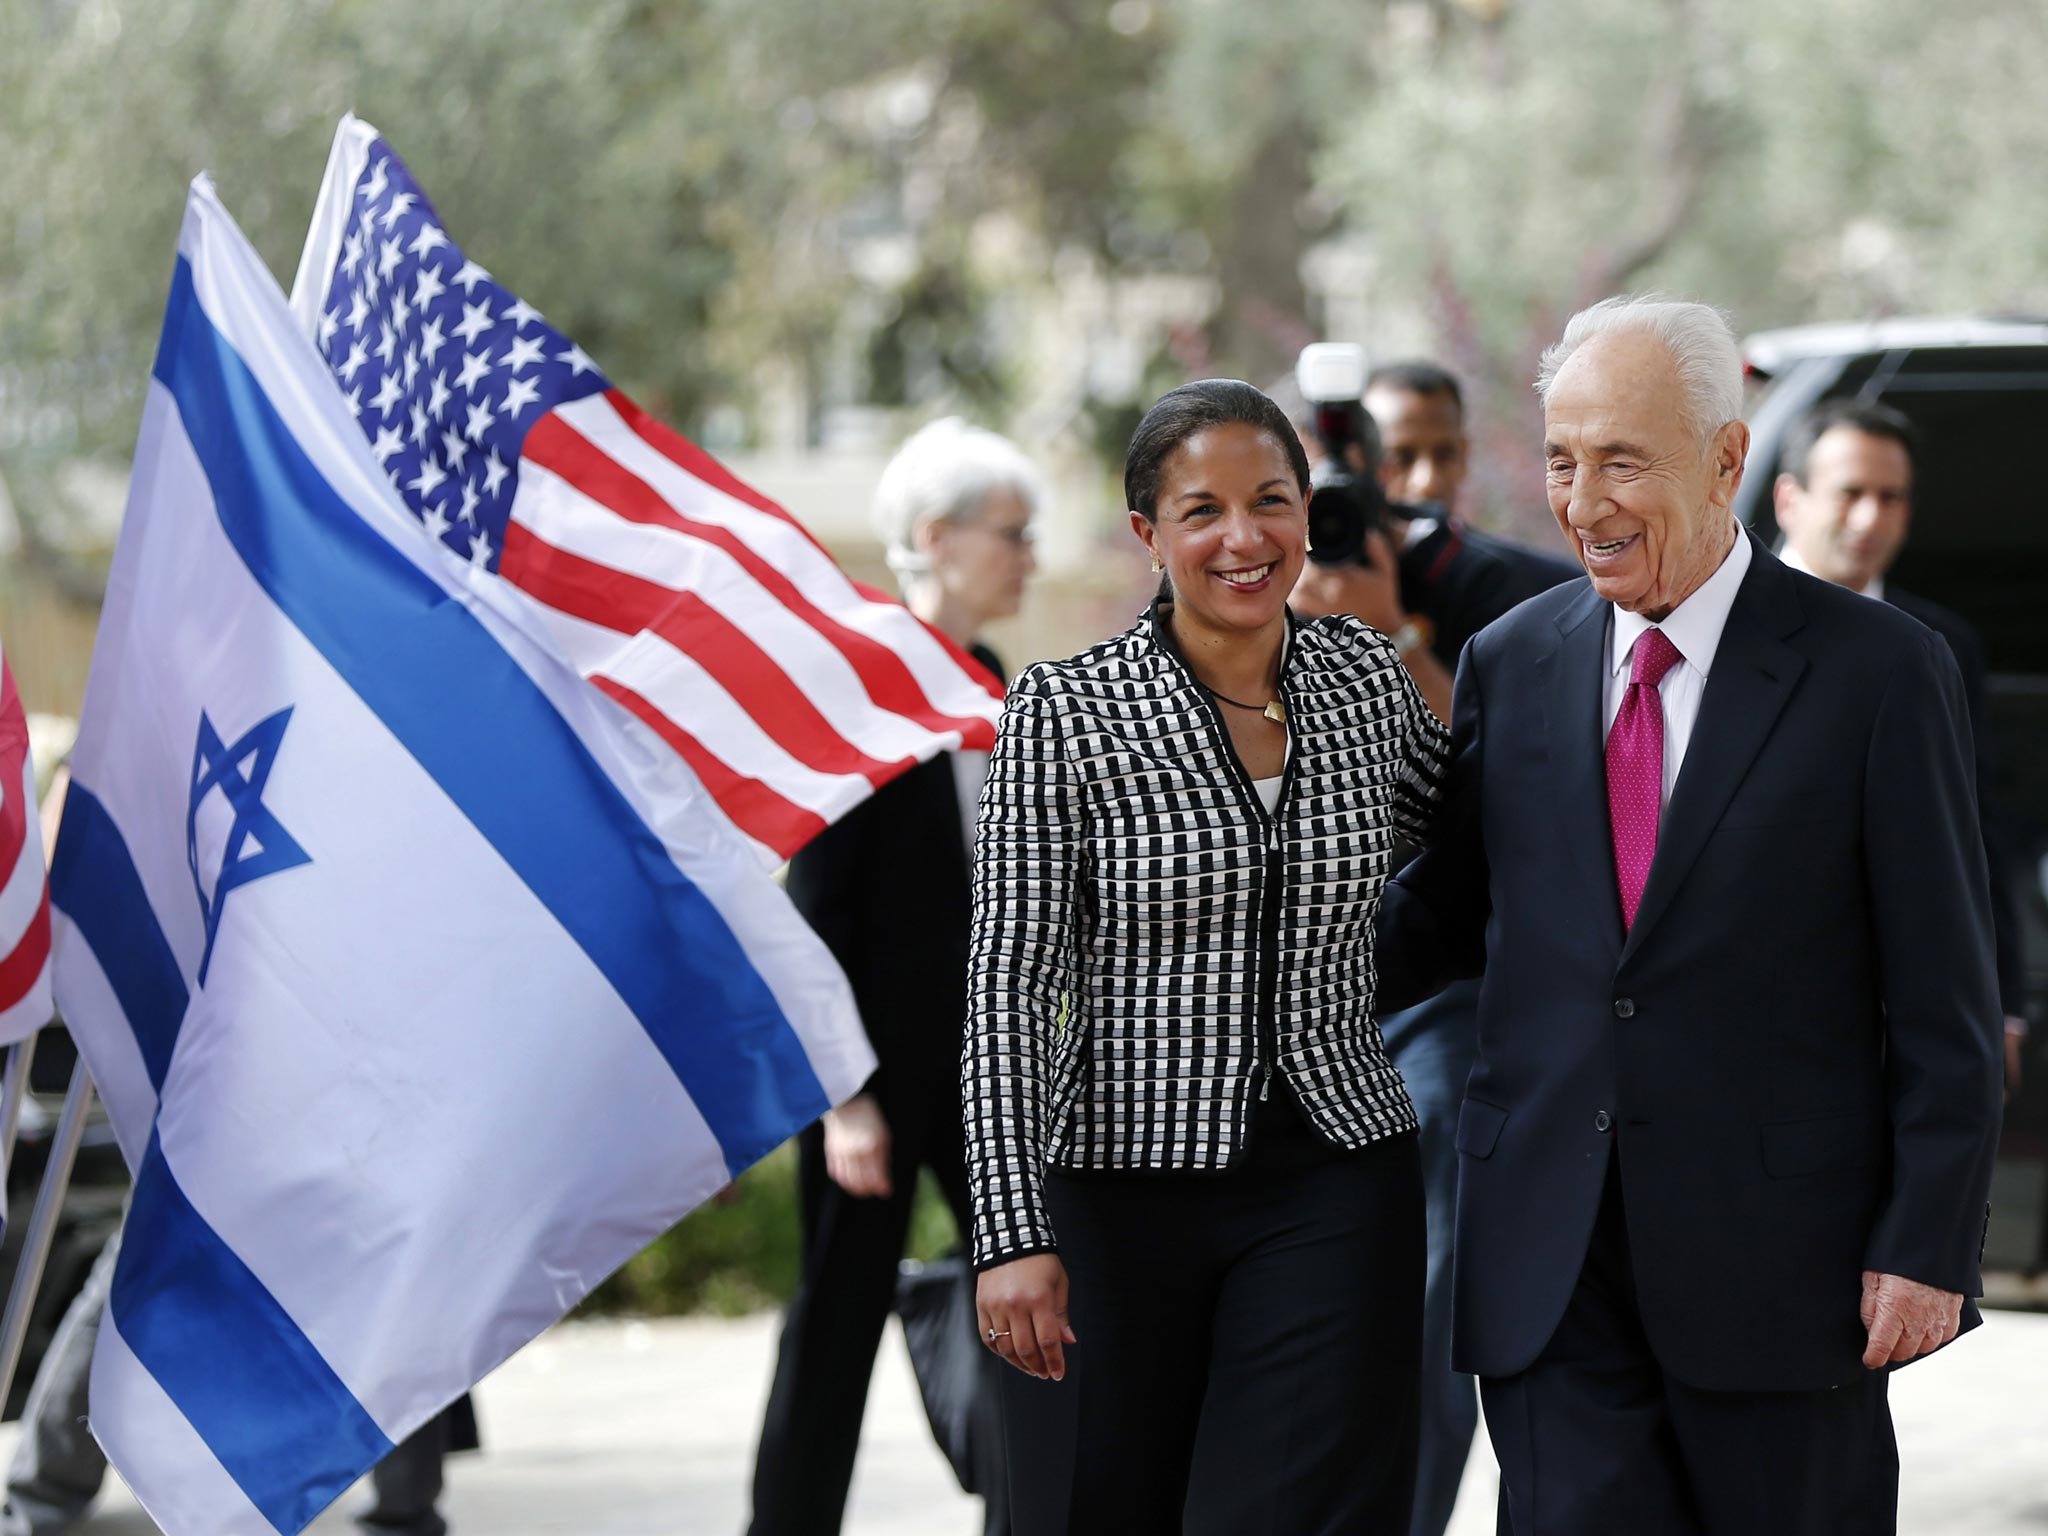 The Israeli President, Shimon Peres, greets Susan Rice, the US National Security Adviser, before their meeting in Jerusalem this week